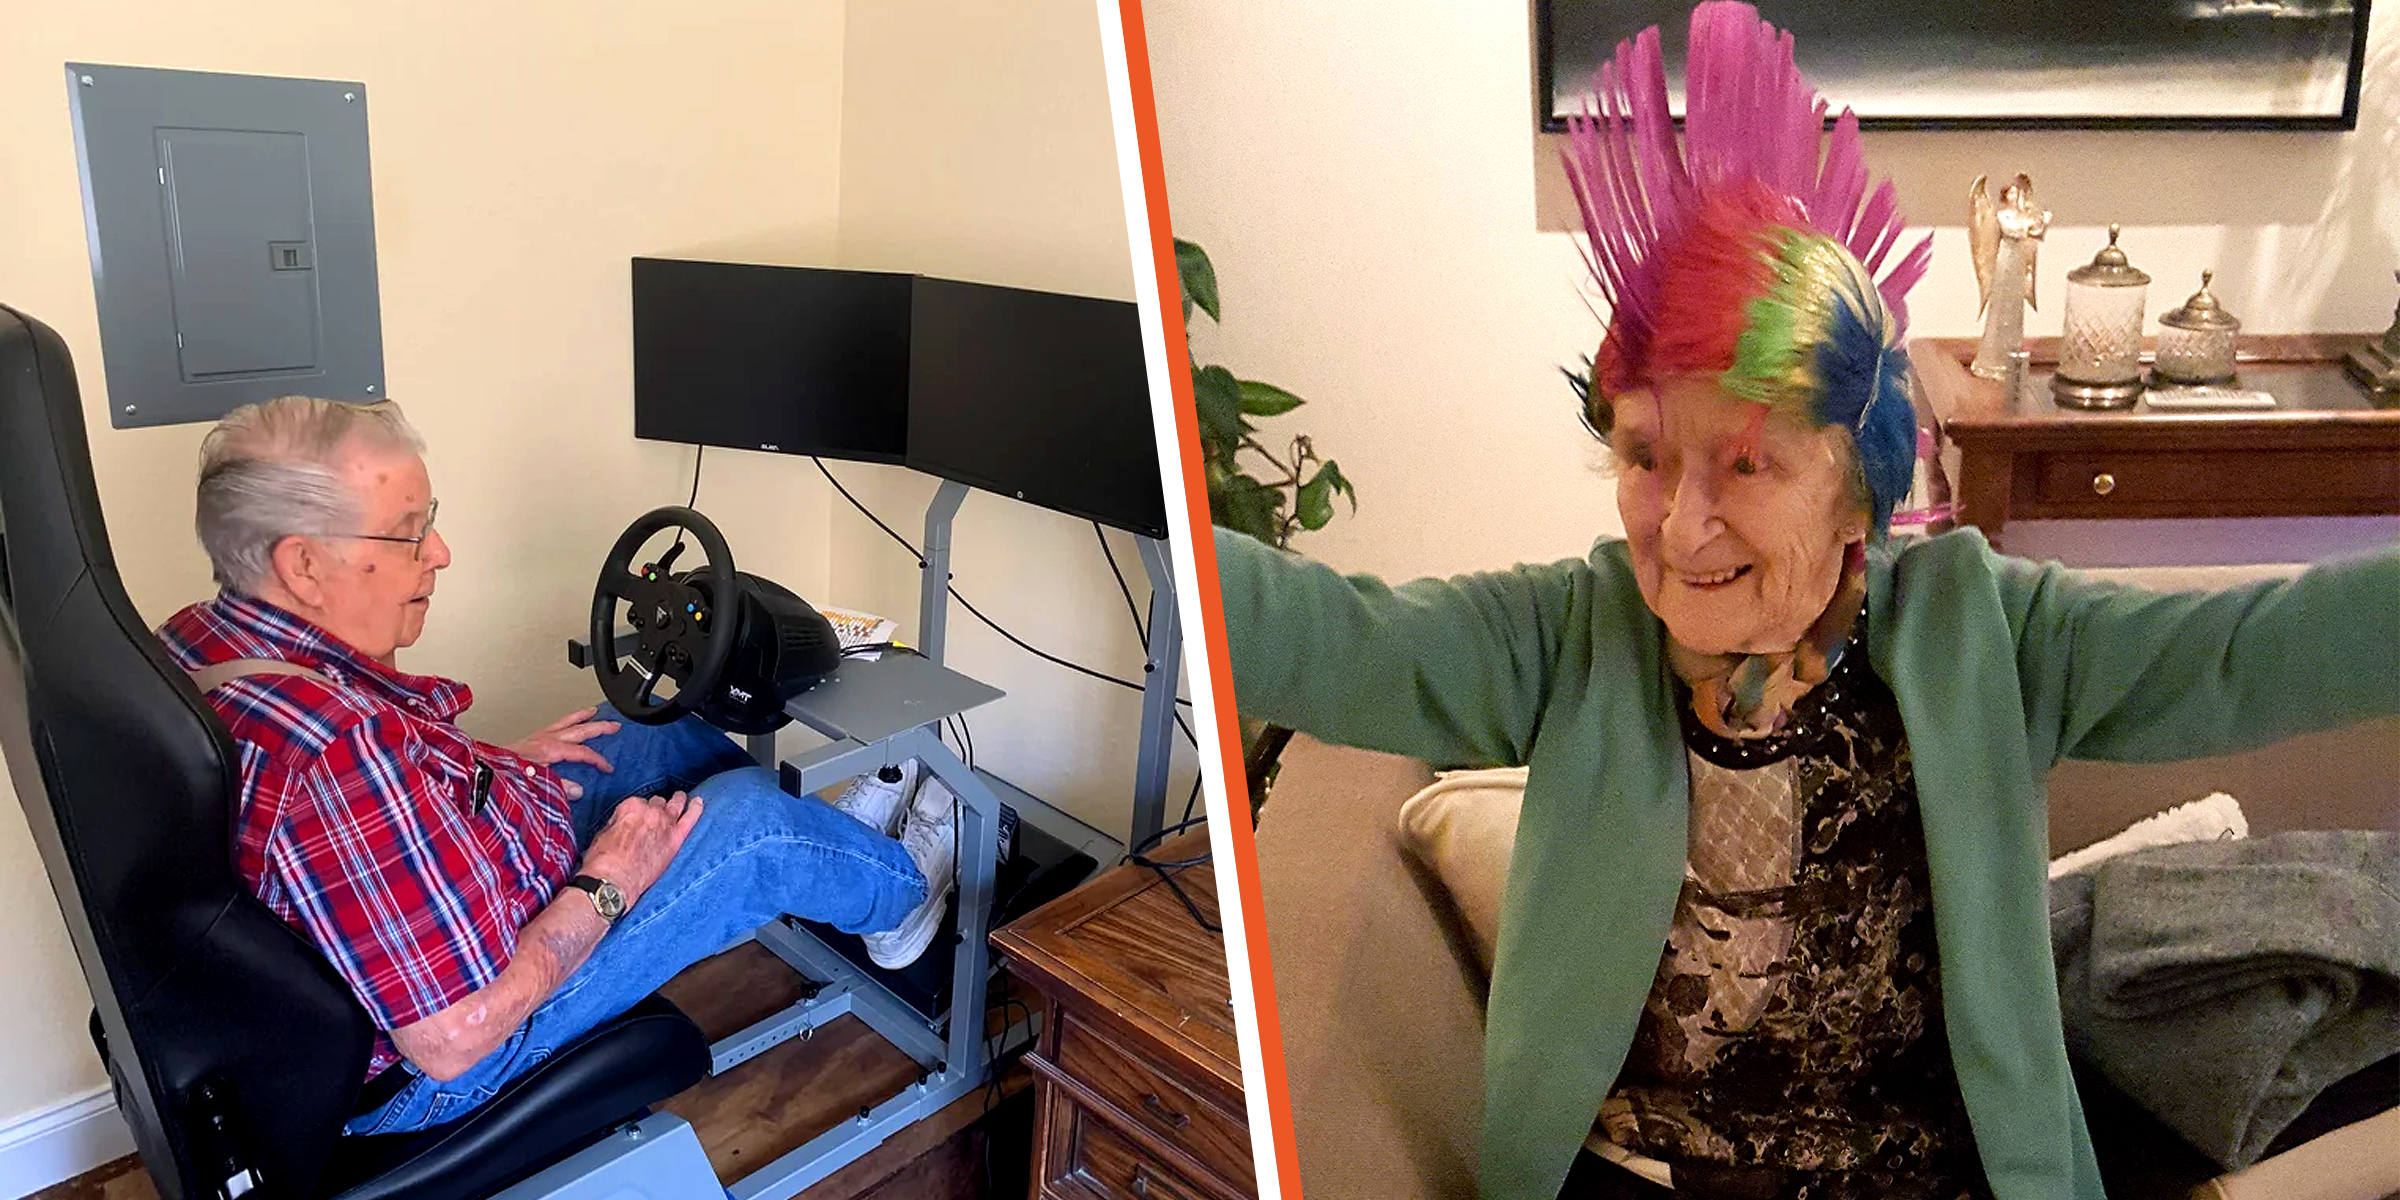 Grandpa with a gaming rig (L), Grandma with a colorful mohawk | Source: reddit.com/gaming imgur.com/Fatuous